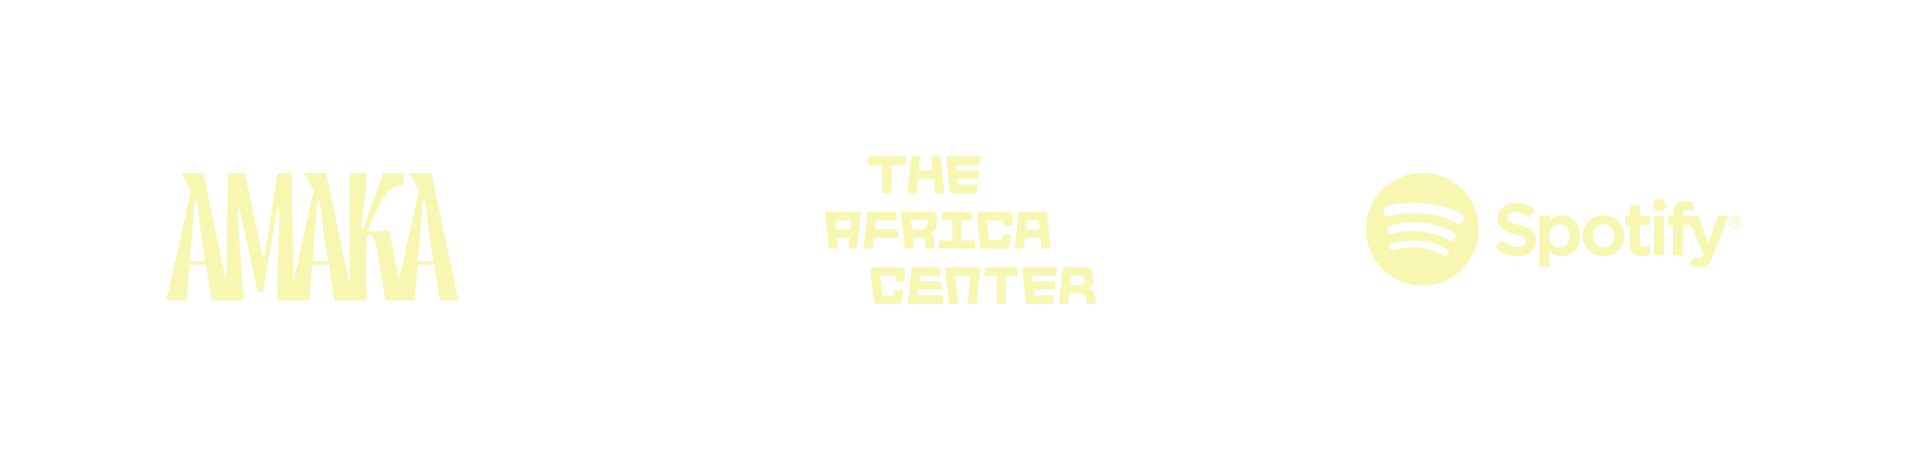 amaka-africa-center-spotify.png